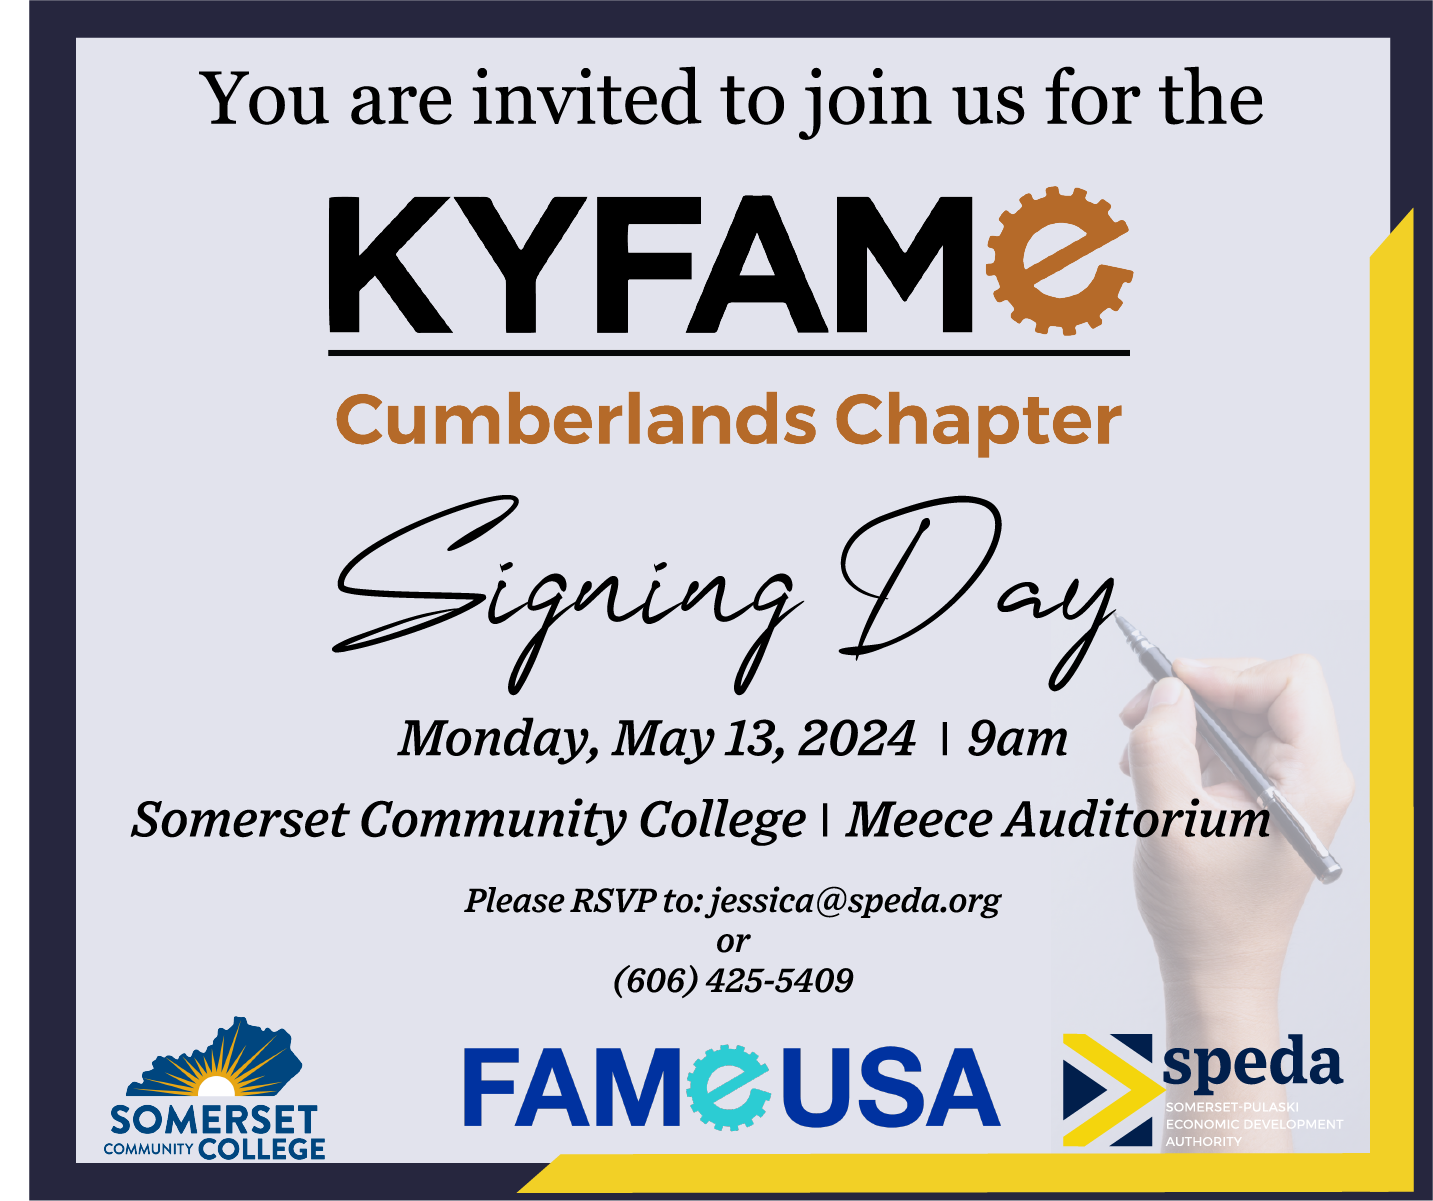 KY FAME Cumberlands Signing Day Invitation